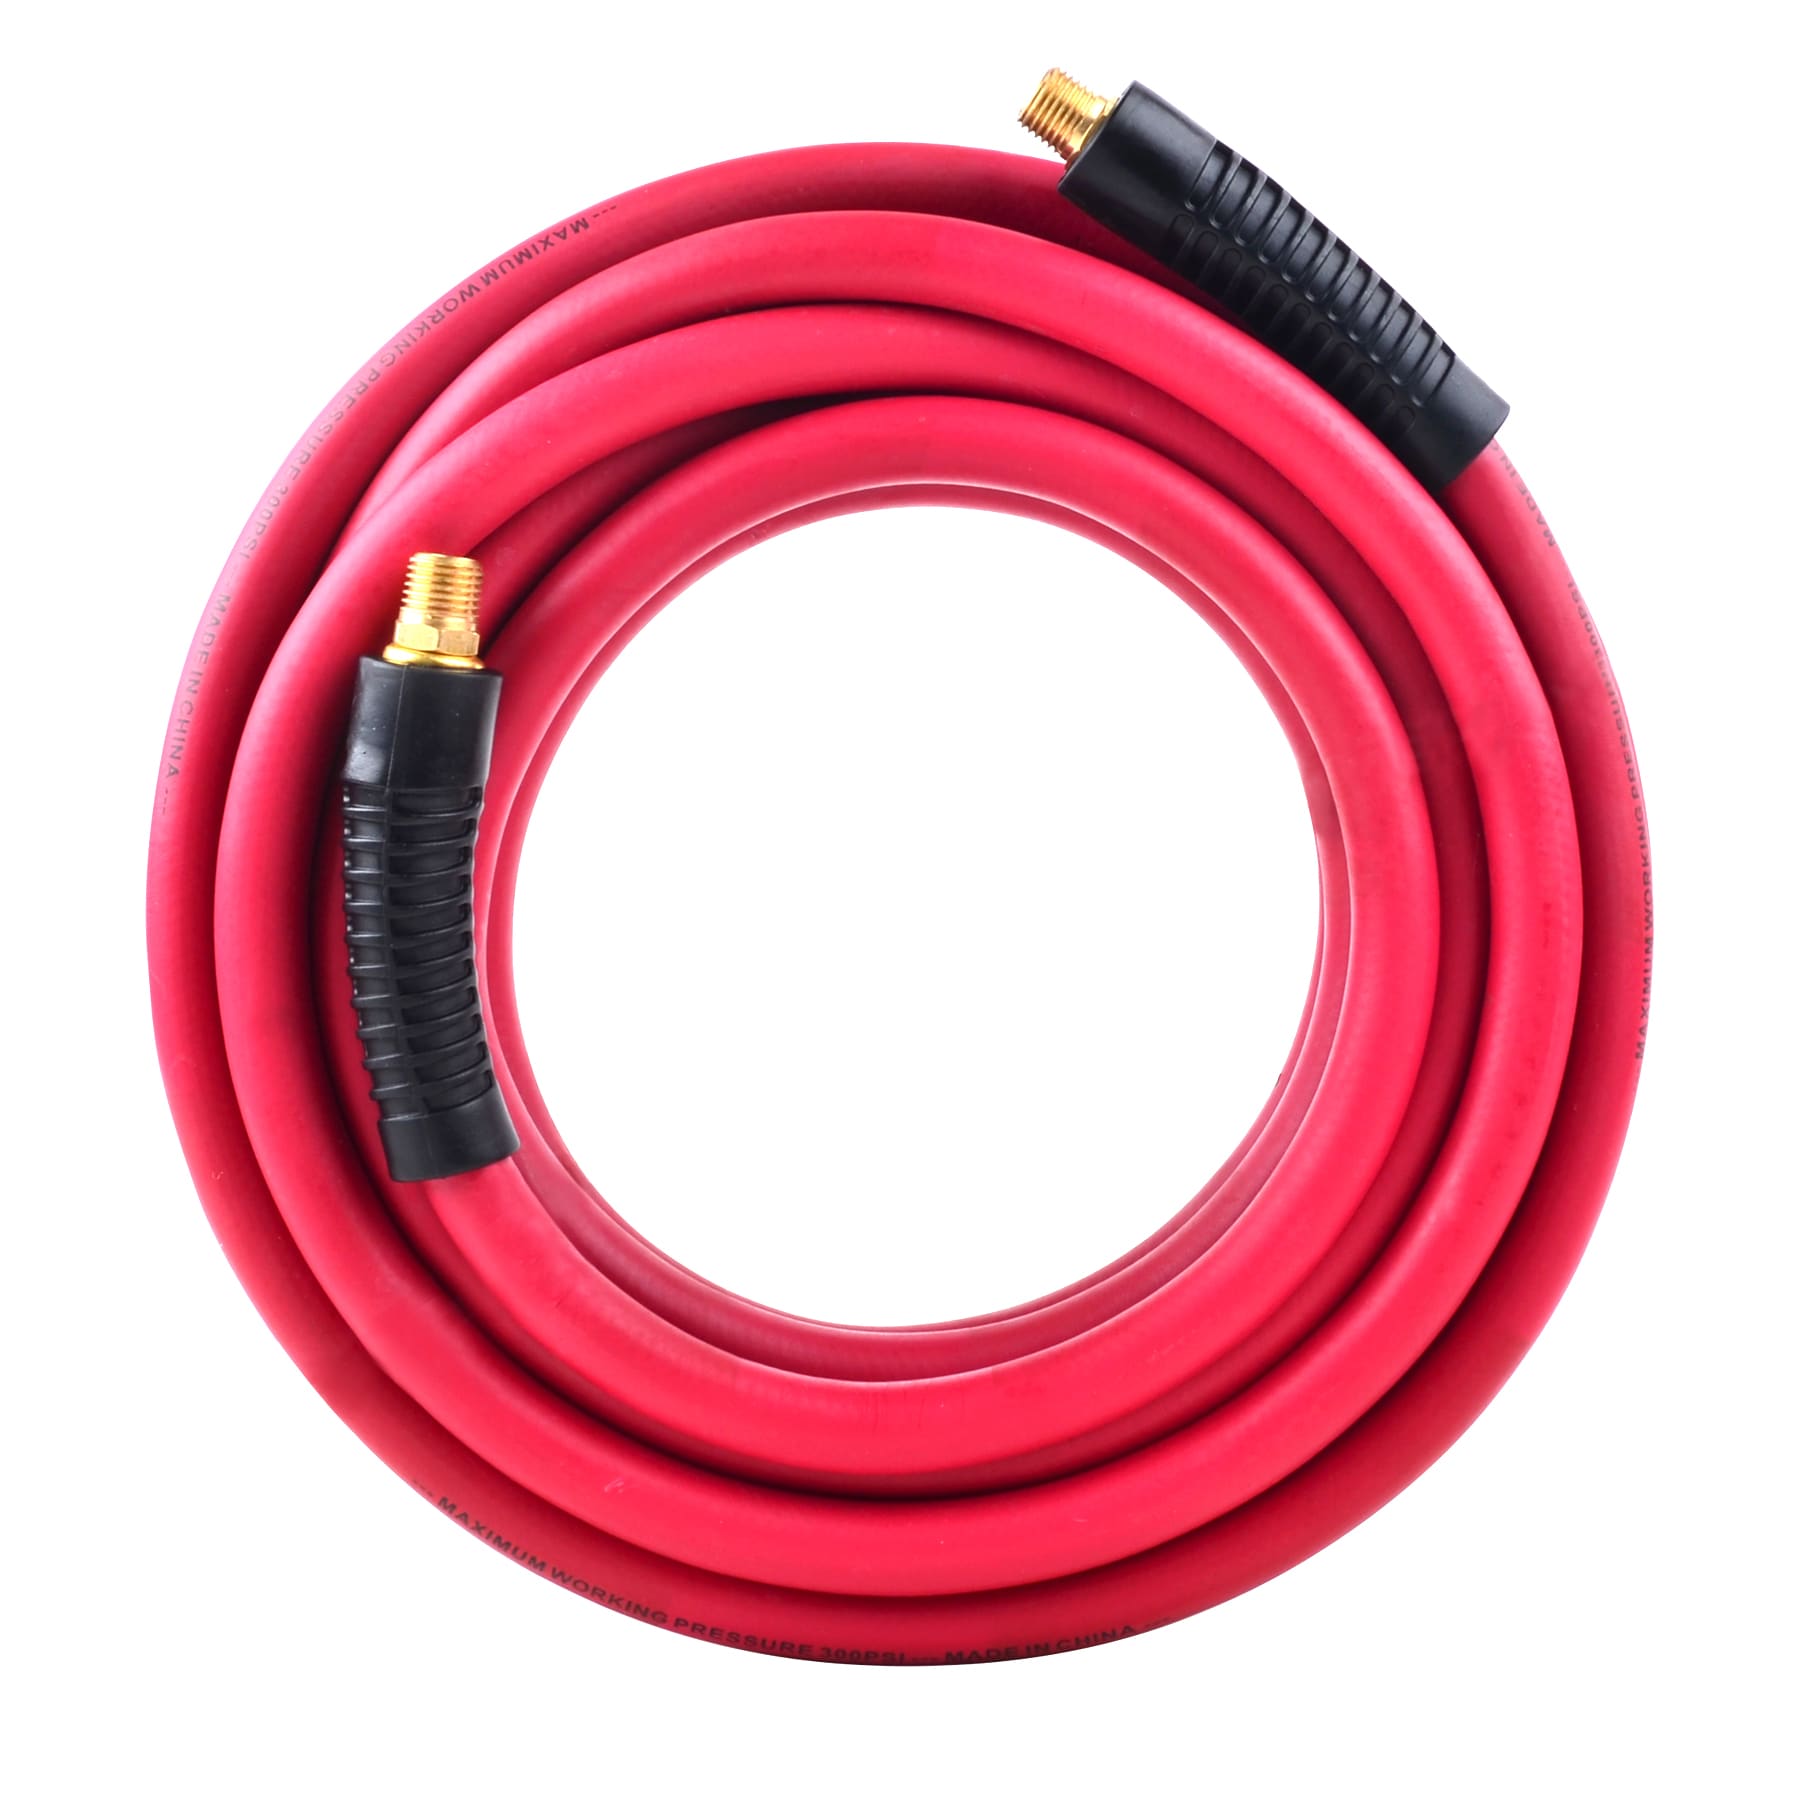 CRAFTSMAN CRAFTSMAN 3/8-in x 25-Ft Rubber Air Hose at